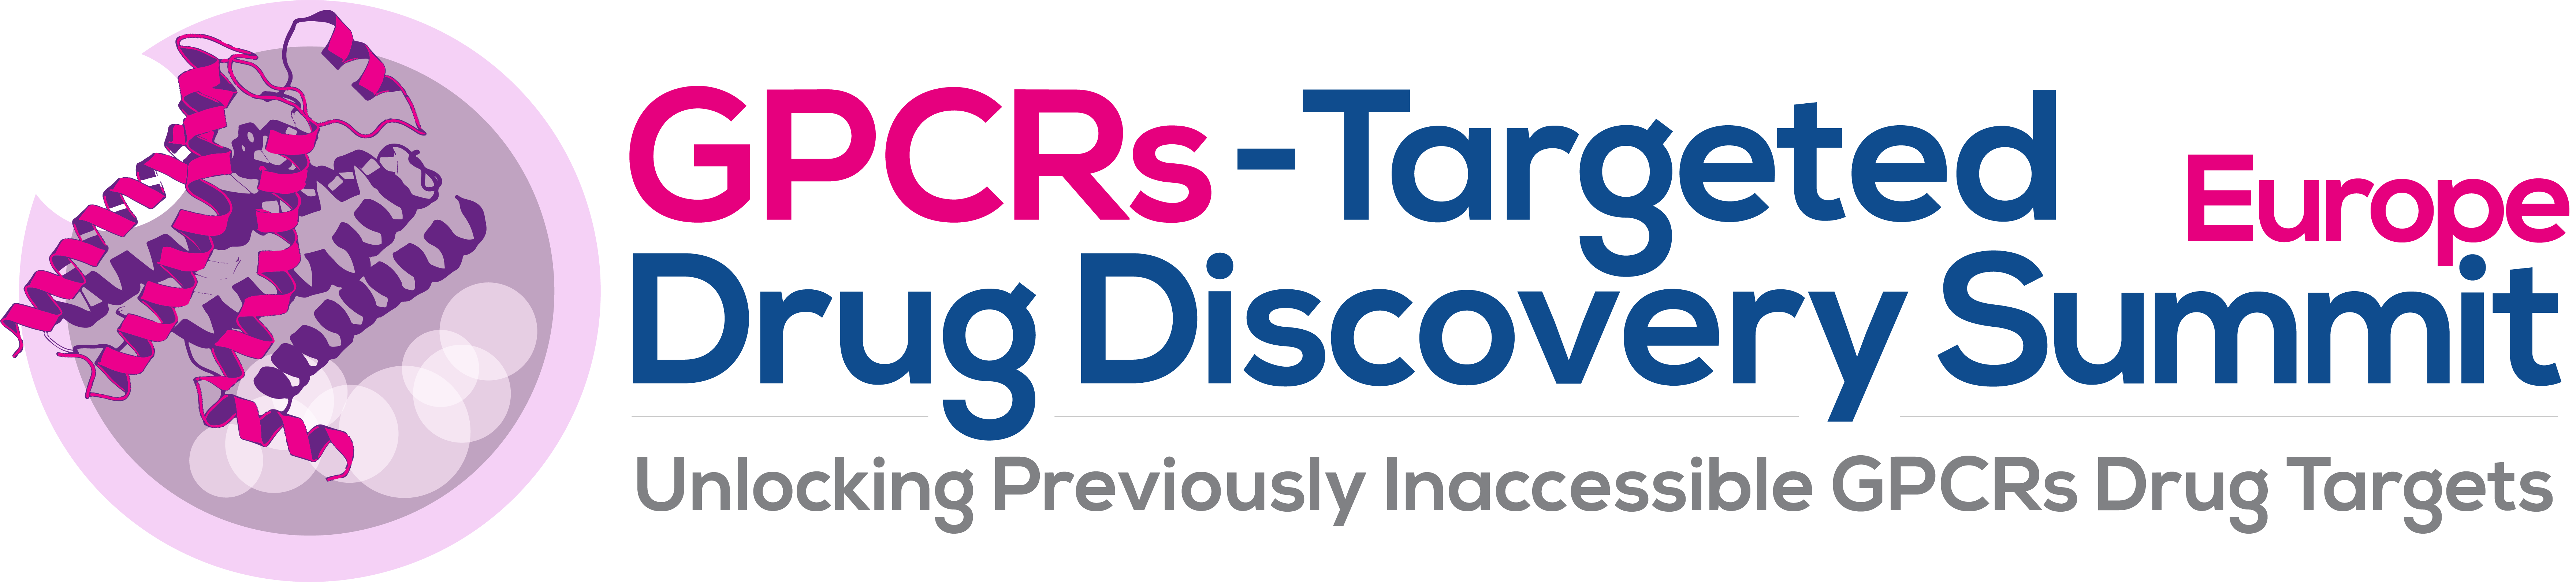 GPCRs Targeted Drug Discovery Summit Europe